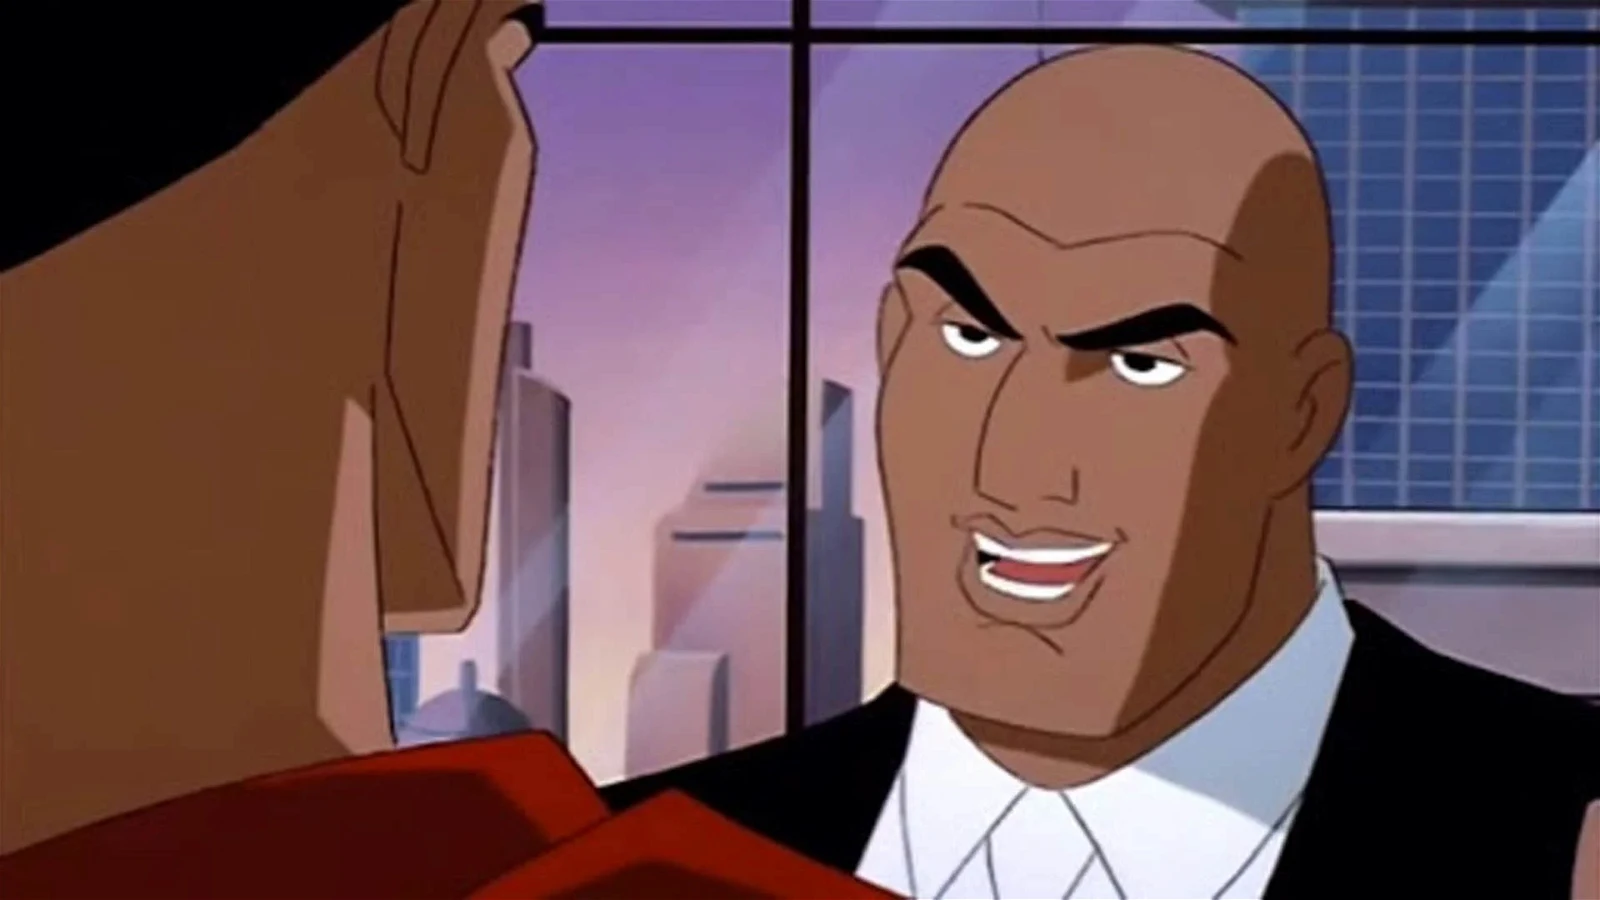 Lex Luthor Source: Superman: The Animated Series